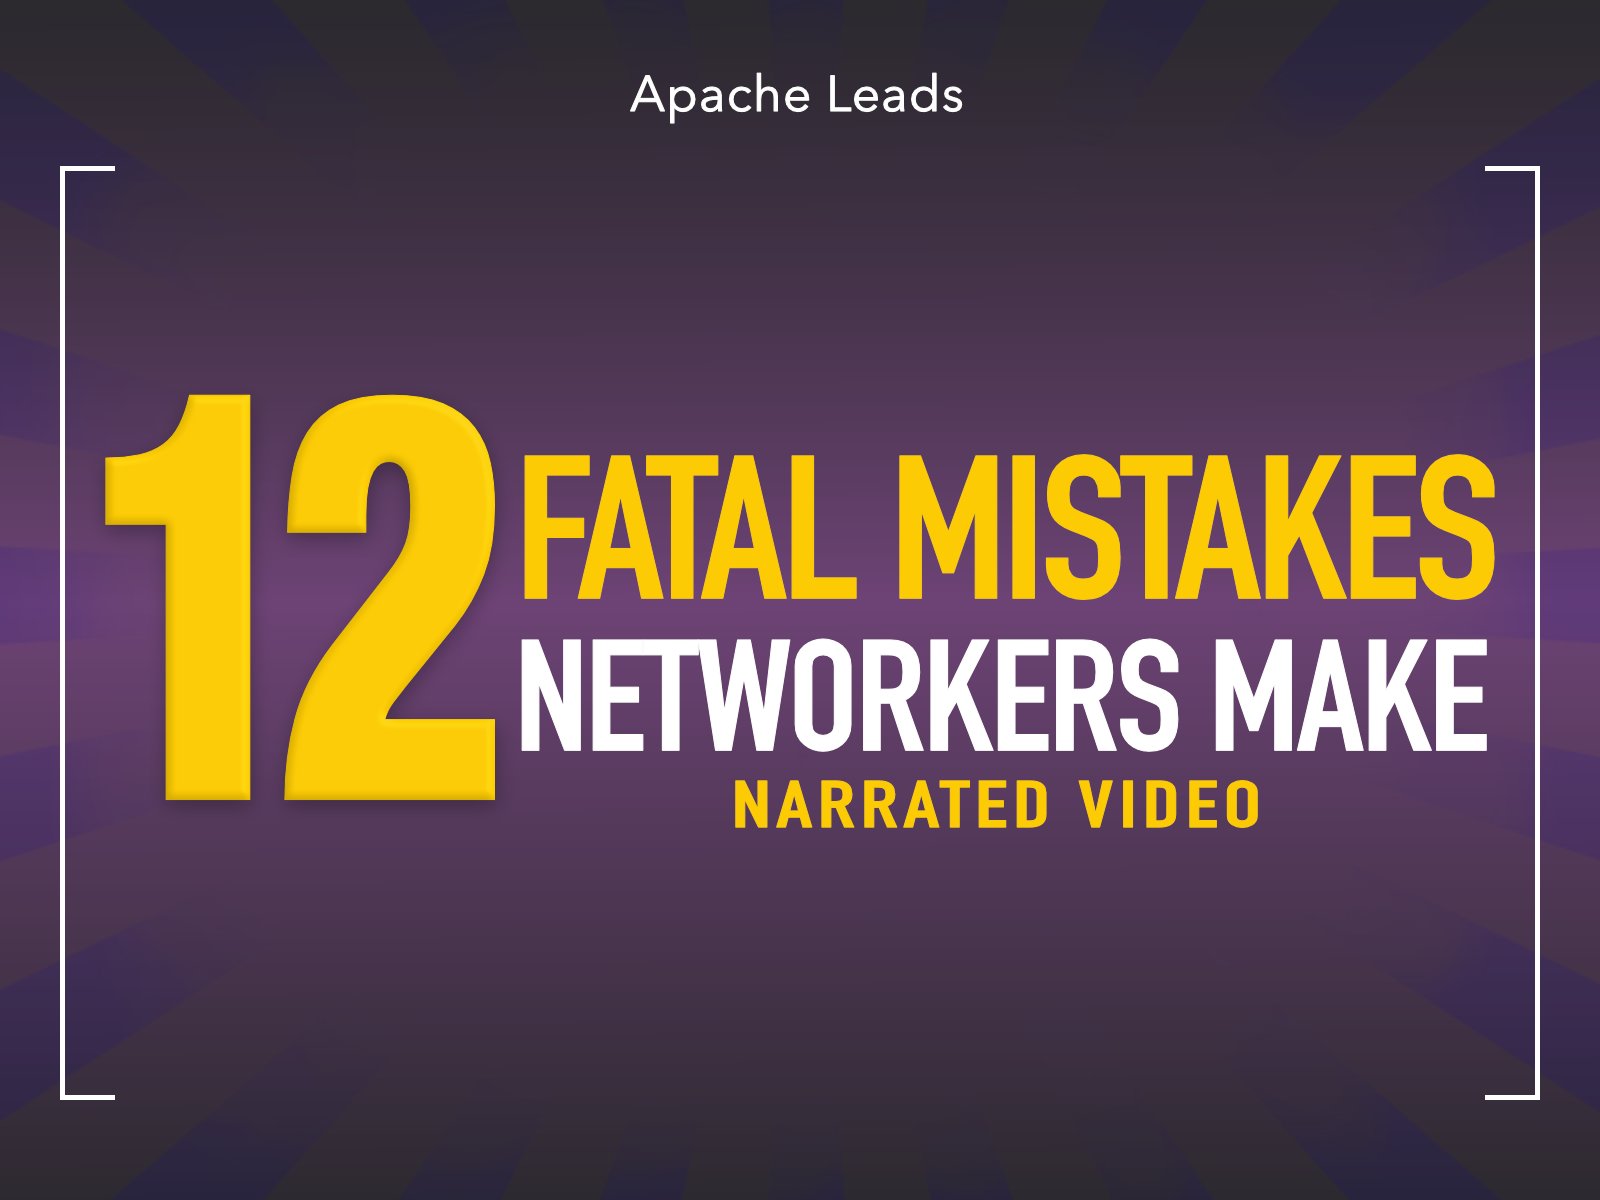 12 Fatal Mistakes Networkers Make